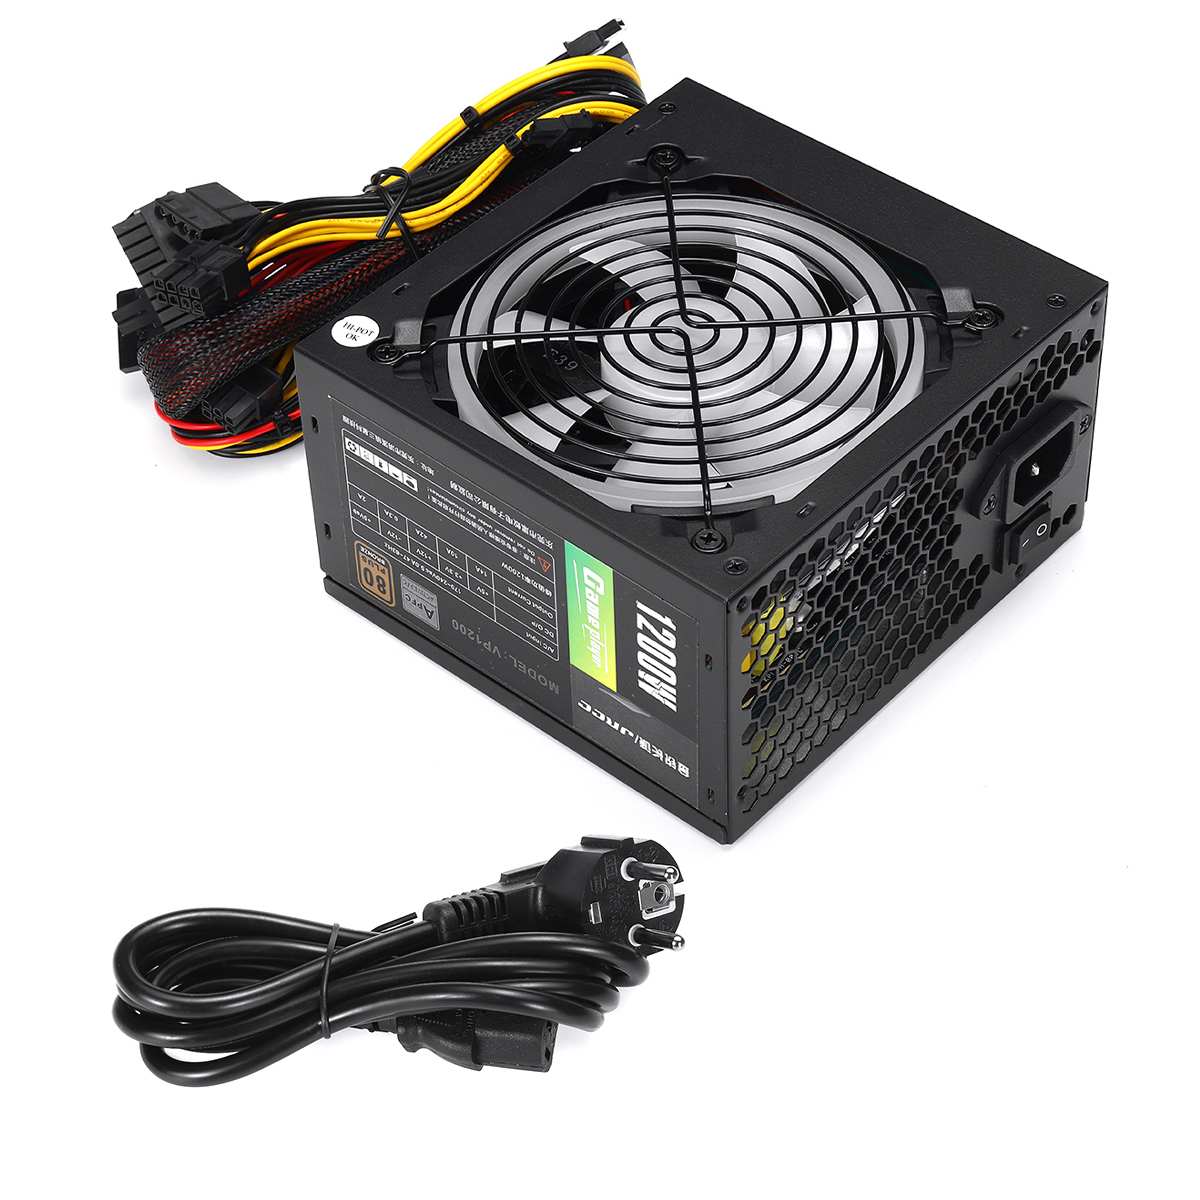 1200W Voeding Actieve Pfc 120Mm Led Fan 2V Atx 8PIN + 2x6PIN Sata Pc Computer voeding Voor Desktop Gaming Computer Eu